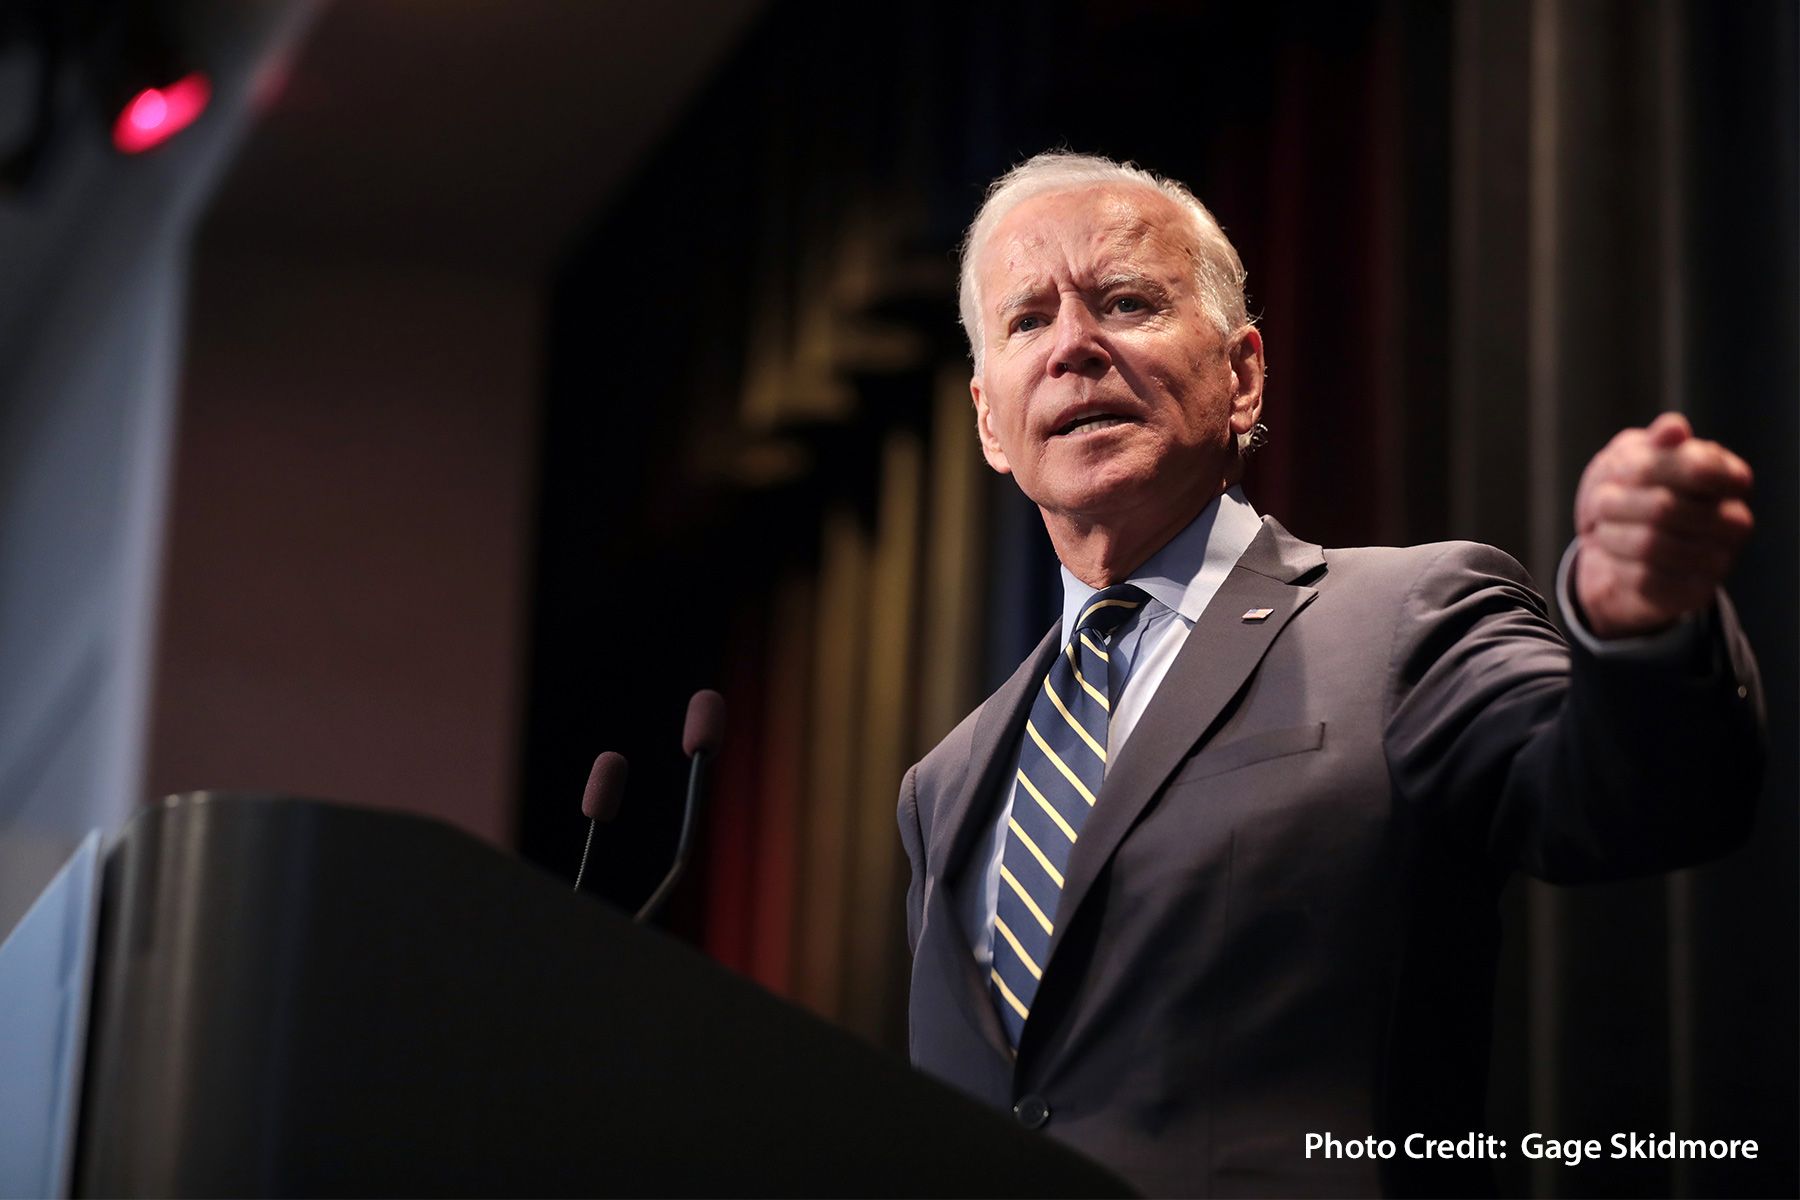 Biden to Announce New Steps to Rein in COVID’s Spread